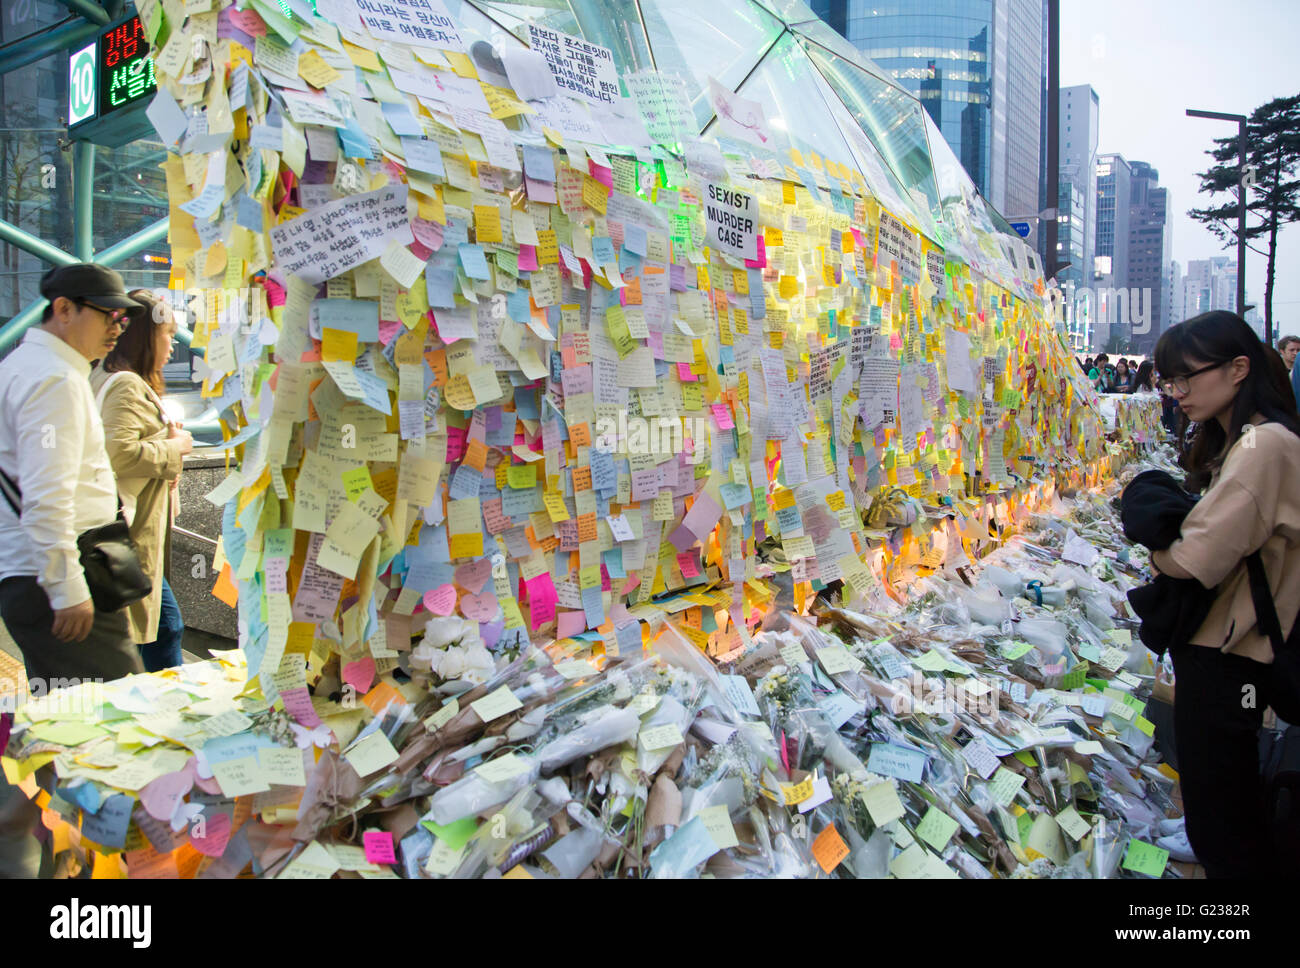 Mourning the stabbing death of a woman, May 22, 2016 : People leave notes at an entrance of Gangnam subway station in Seoul, South Korea, to mourn the stabbing death of a 23-year-old woman by a male attacker. A 34-year-old man who has a record of schizophrenia, was arrested on May 17, 2016 on suspicion of killing the 23-year-old woman at a bar bathroom near the Gangnam subway station in Gangnam district, which has sparked a wave of mourning and a public outcry over violence against women in the traditionally male-dominated country. The two had never met prior to the incident, the police said. Stock Photo